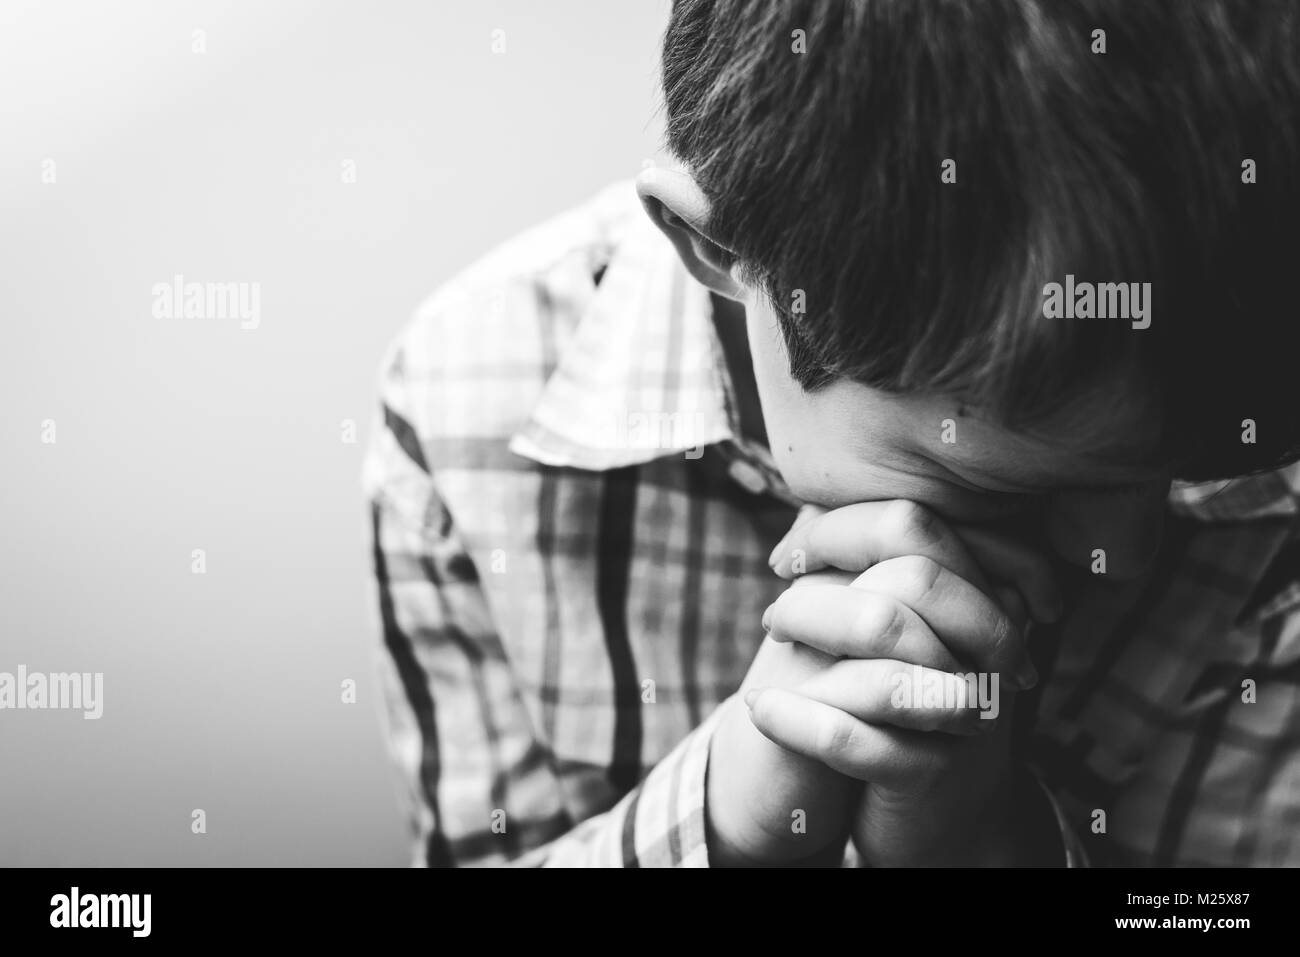 A young boy with his head bowed in prayer. Stock Photo